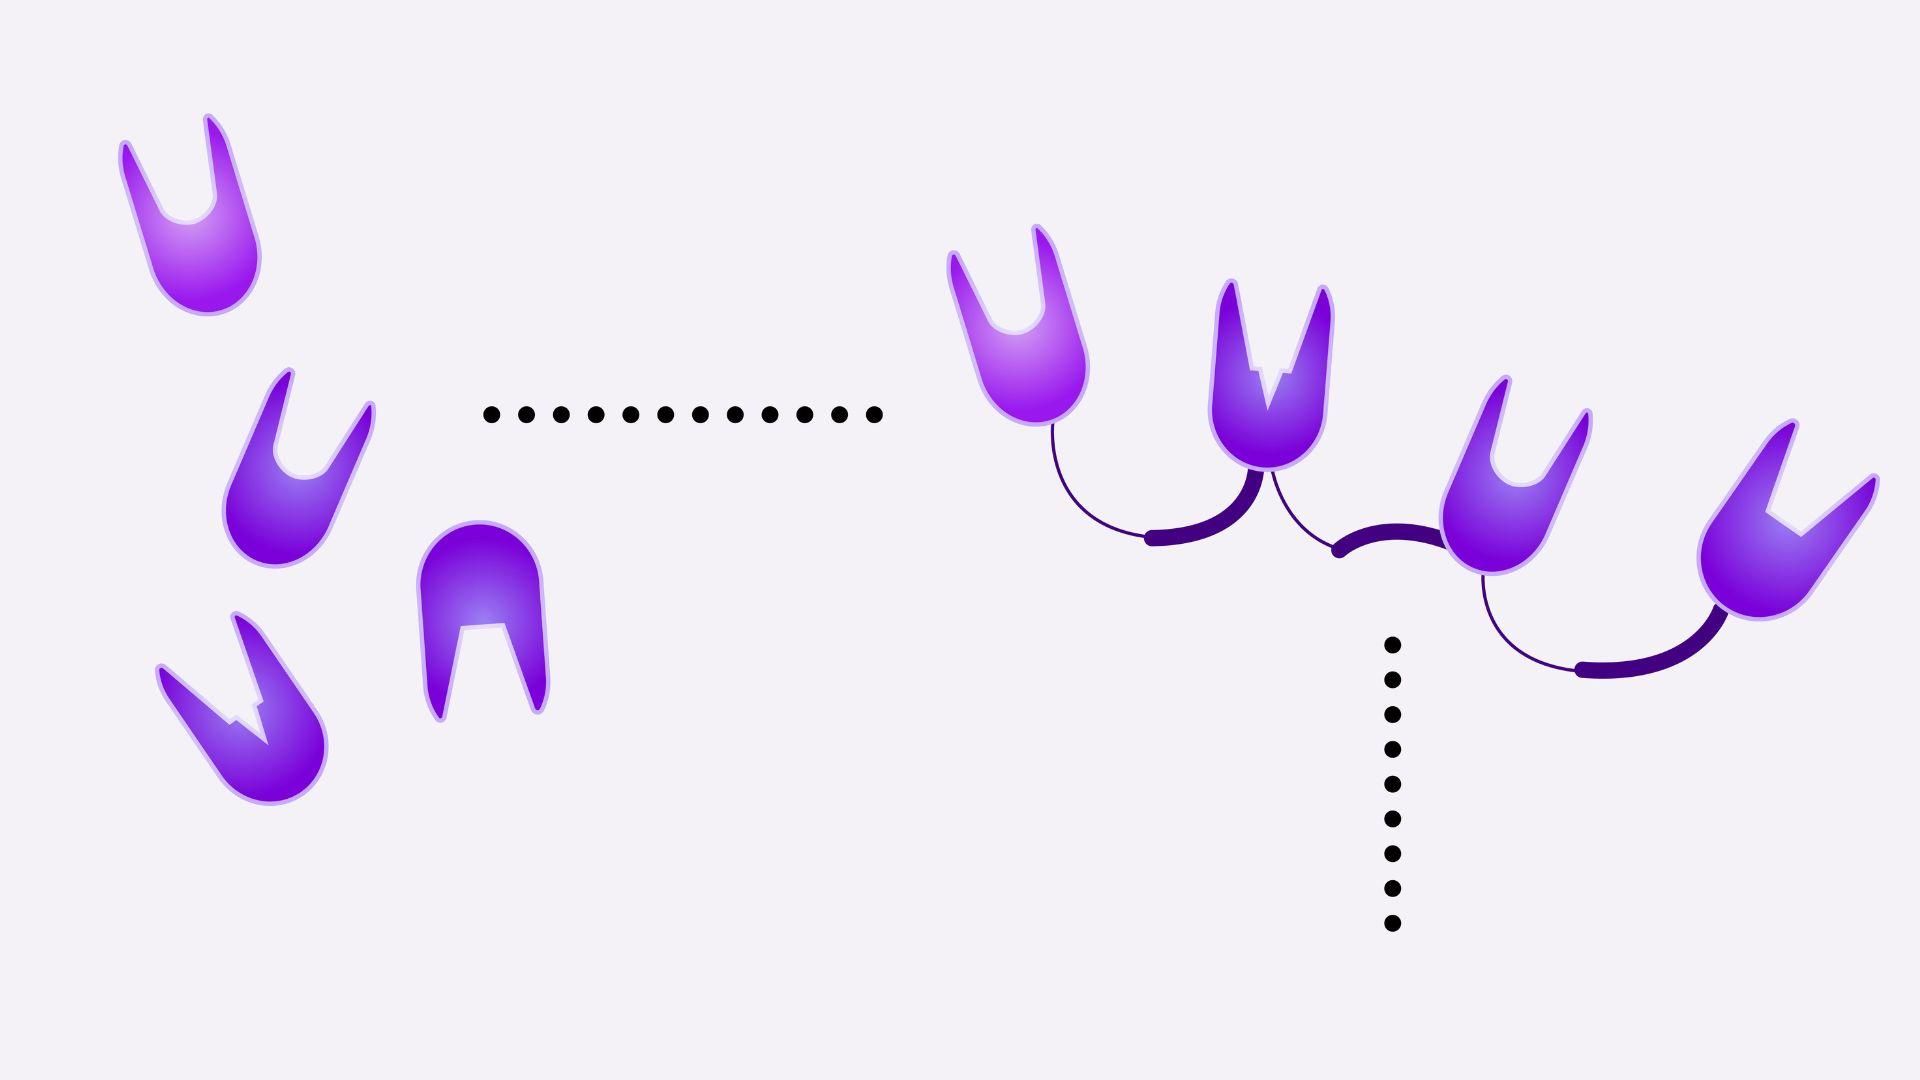 The basic building block of a therapeutic NANOBODY molecule is a fragment from one domain of a heavy-chain antibody (left). Fragments from different heavy-chain antibodies can be strung together (right)